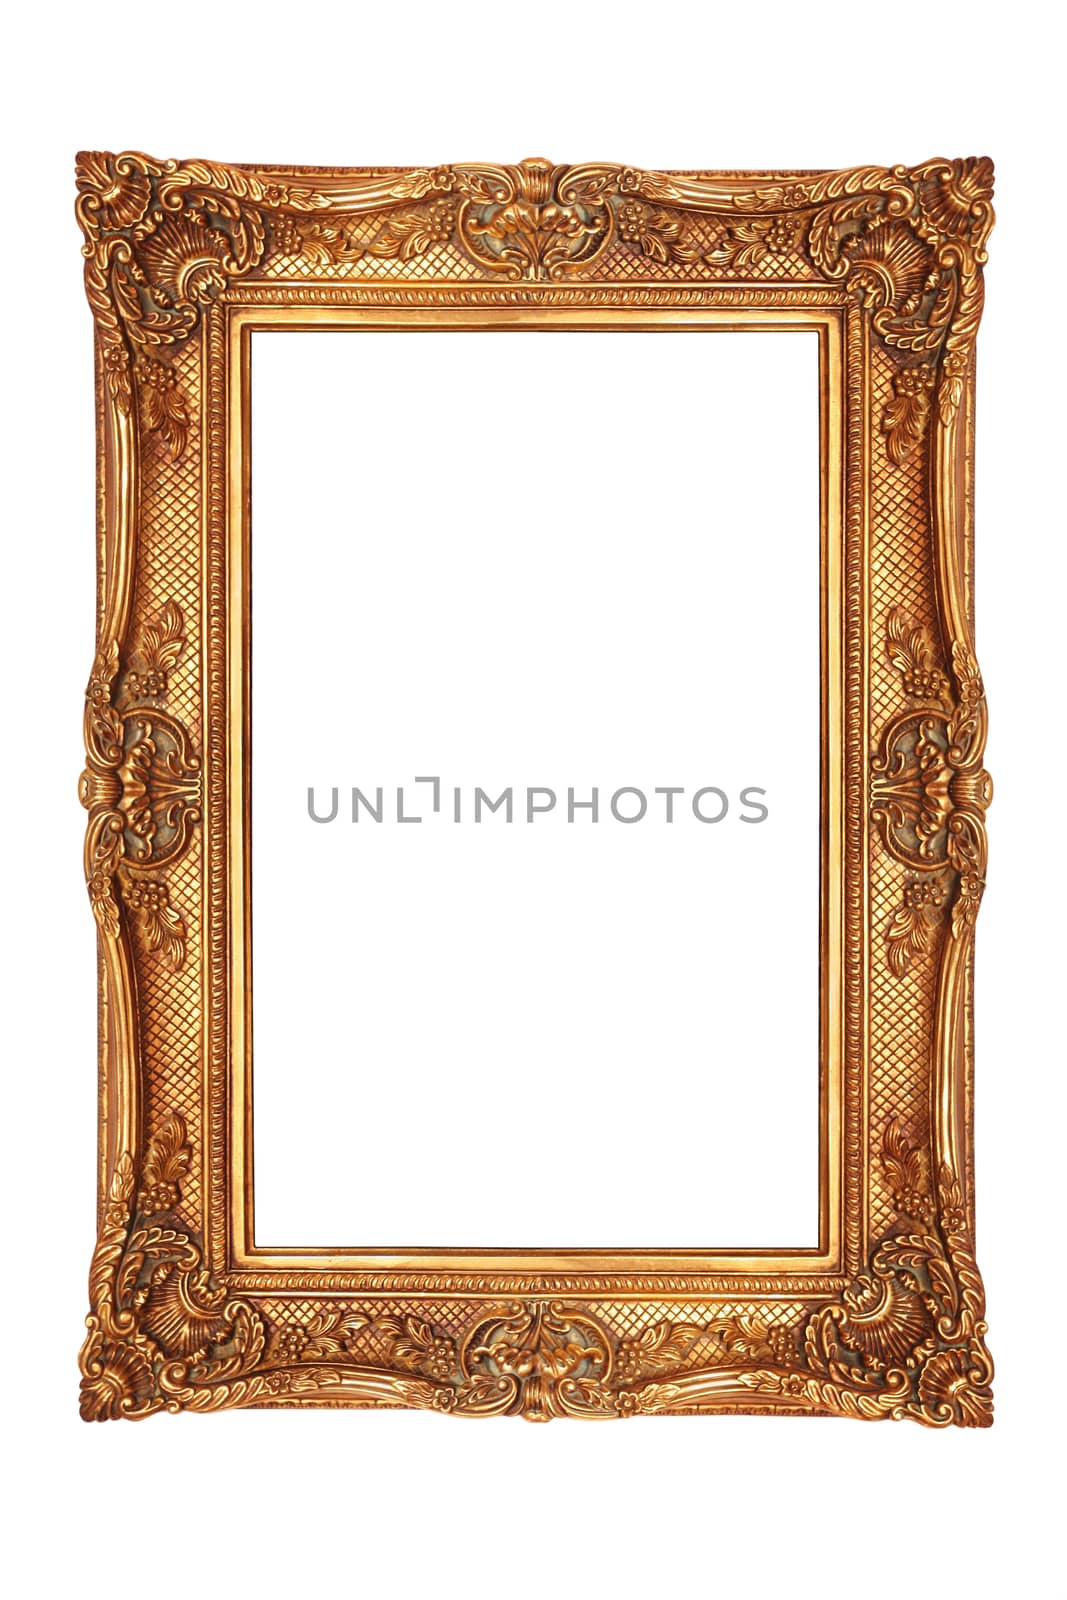 gilt frame in ancient style with an ornament isolated